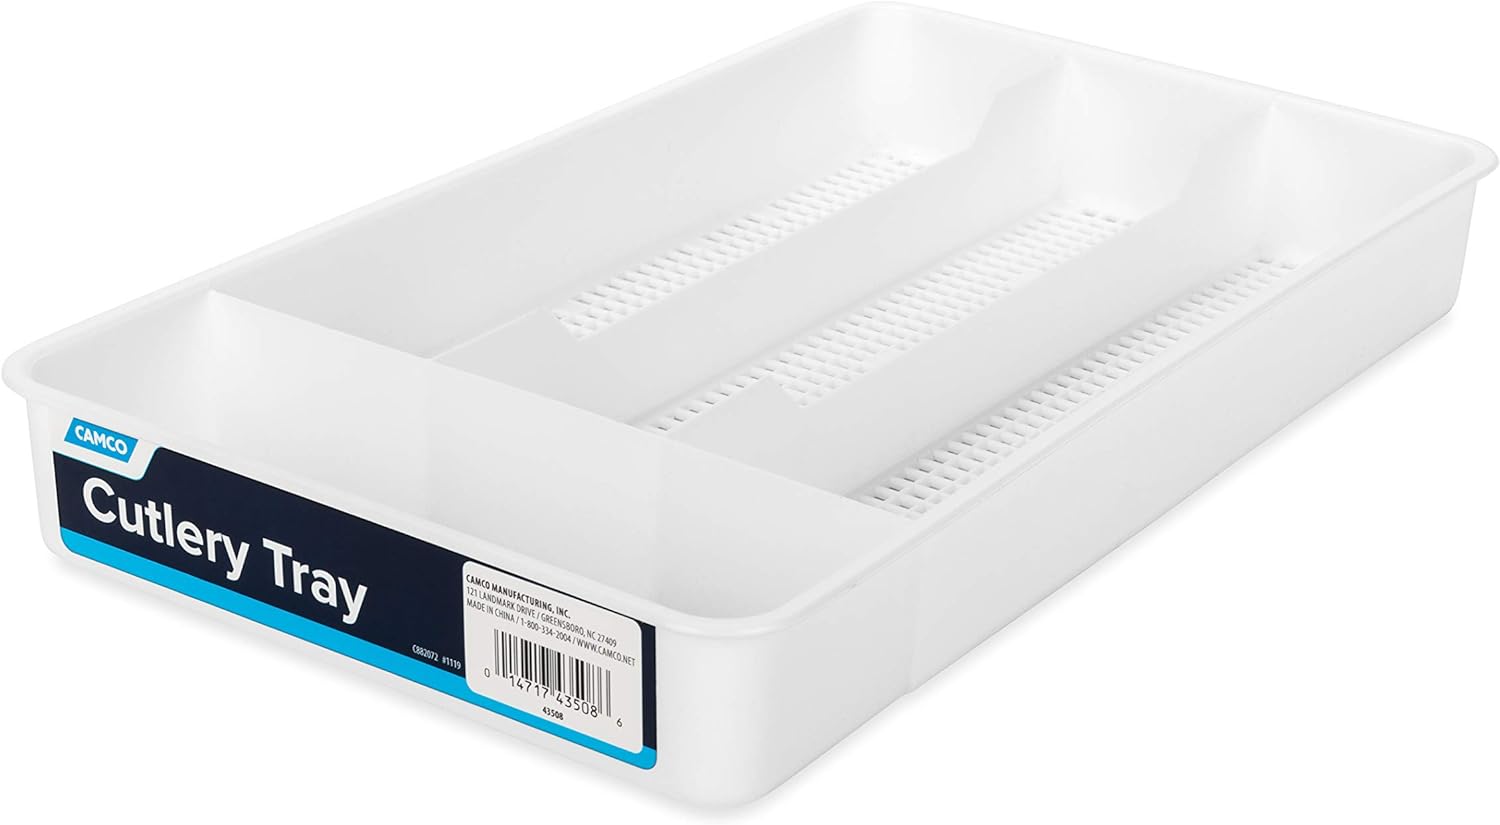 Camco Cutlery Tray- White